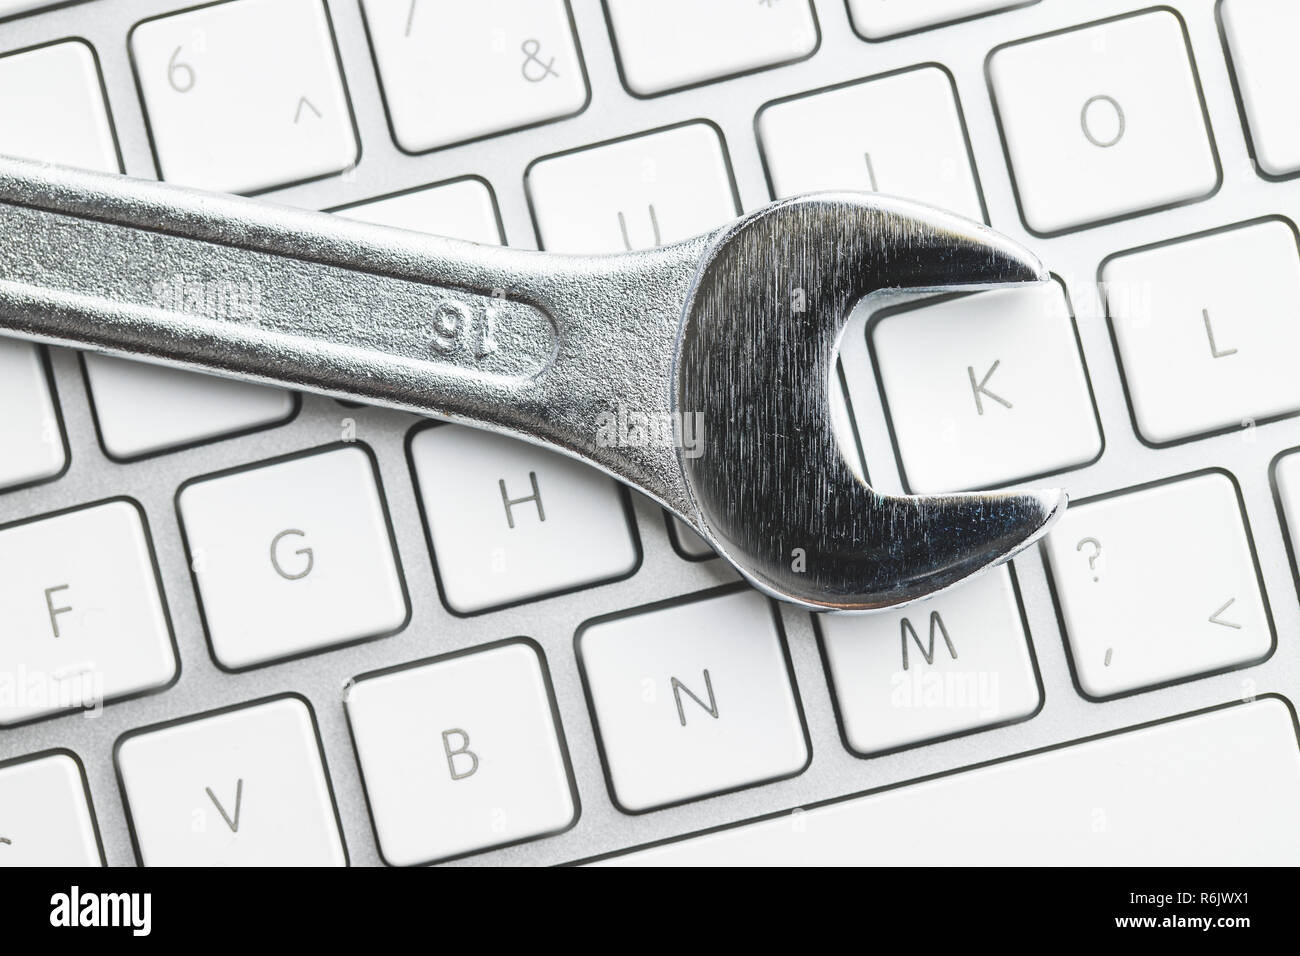 Wrench and computer keyboard. Metallic spanner on keyboard. Stock Photo